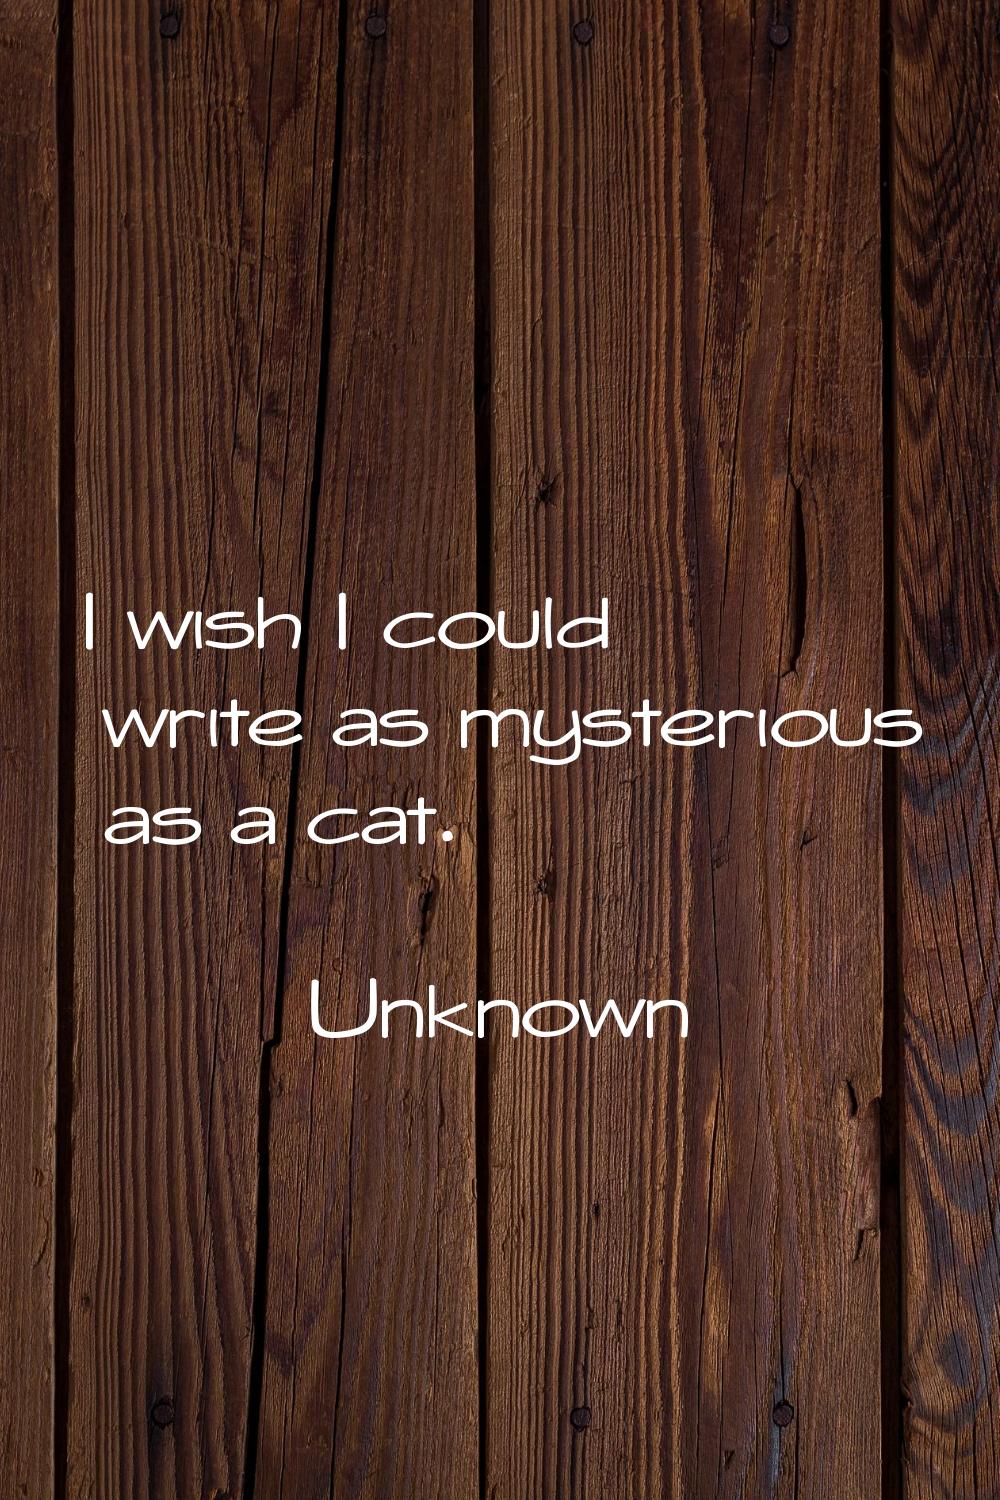 I wish I could write as mysterious as a cat.